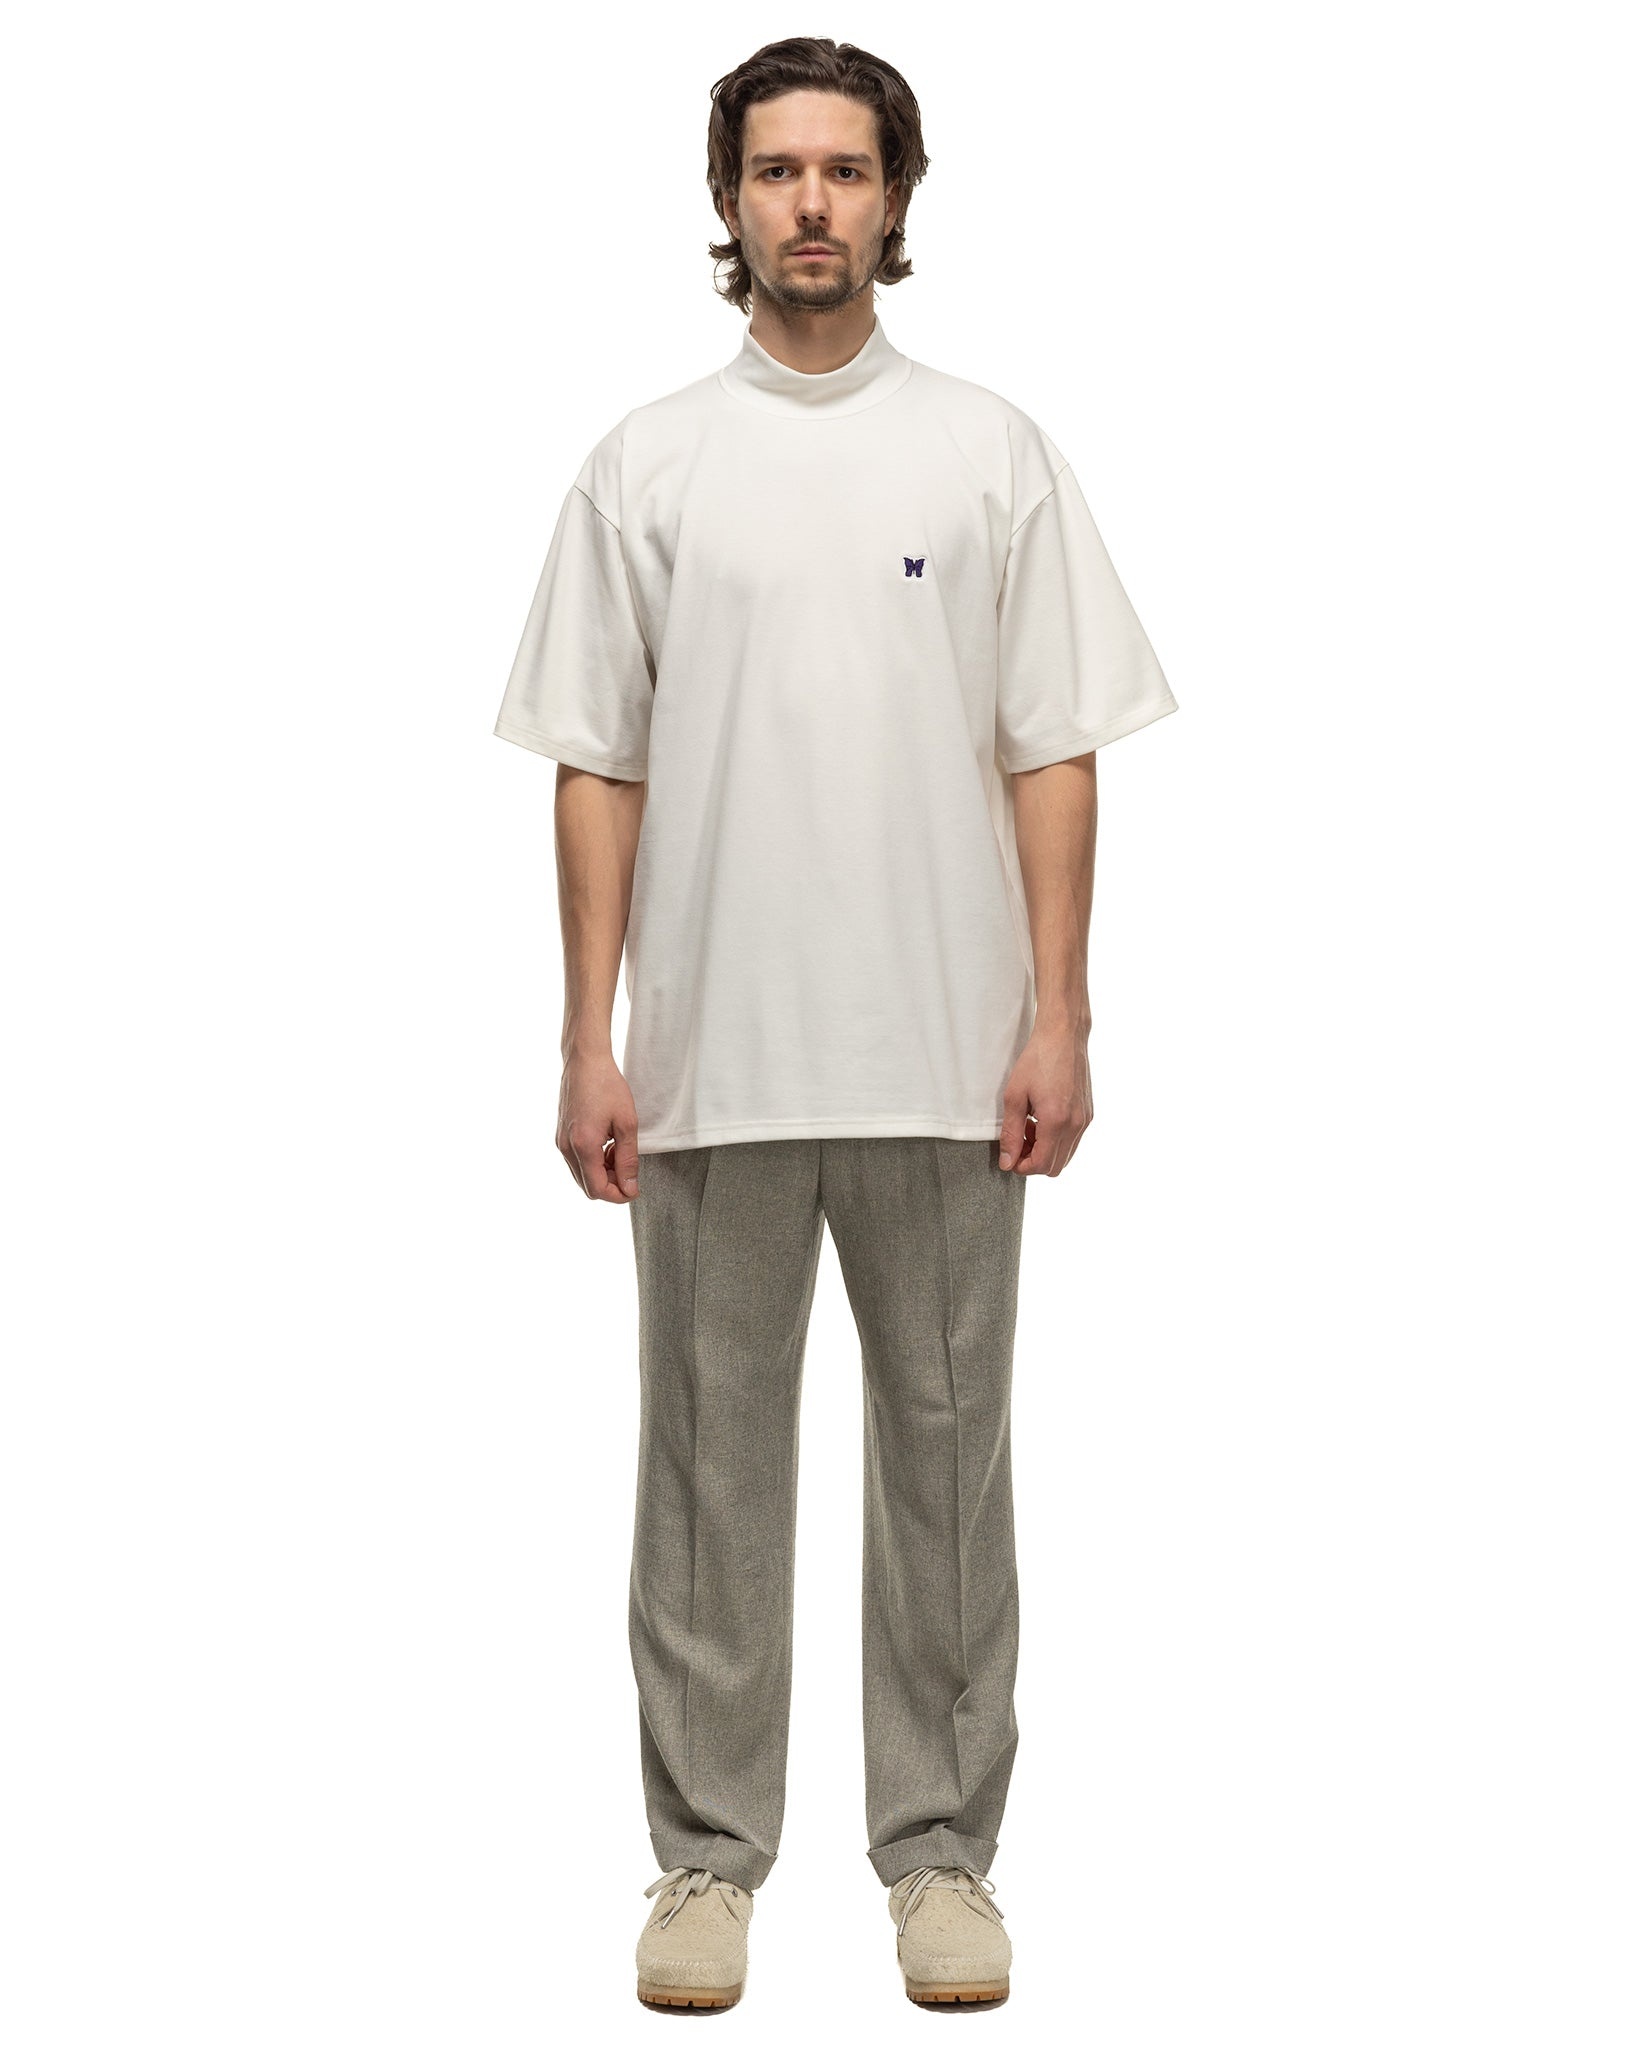 S/S Mock Neck Tee - Poly Jersey White - 2